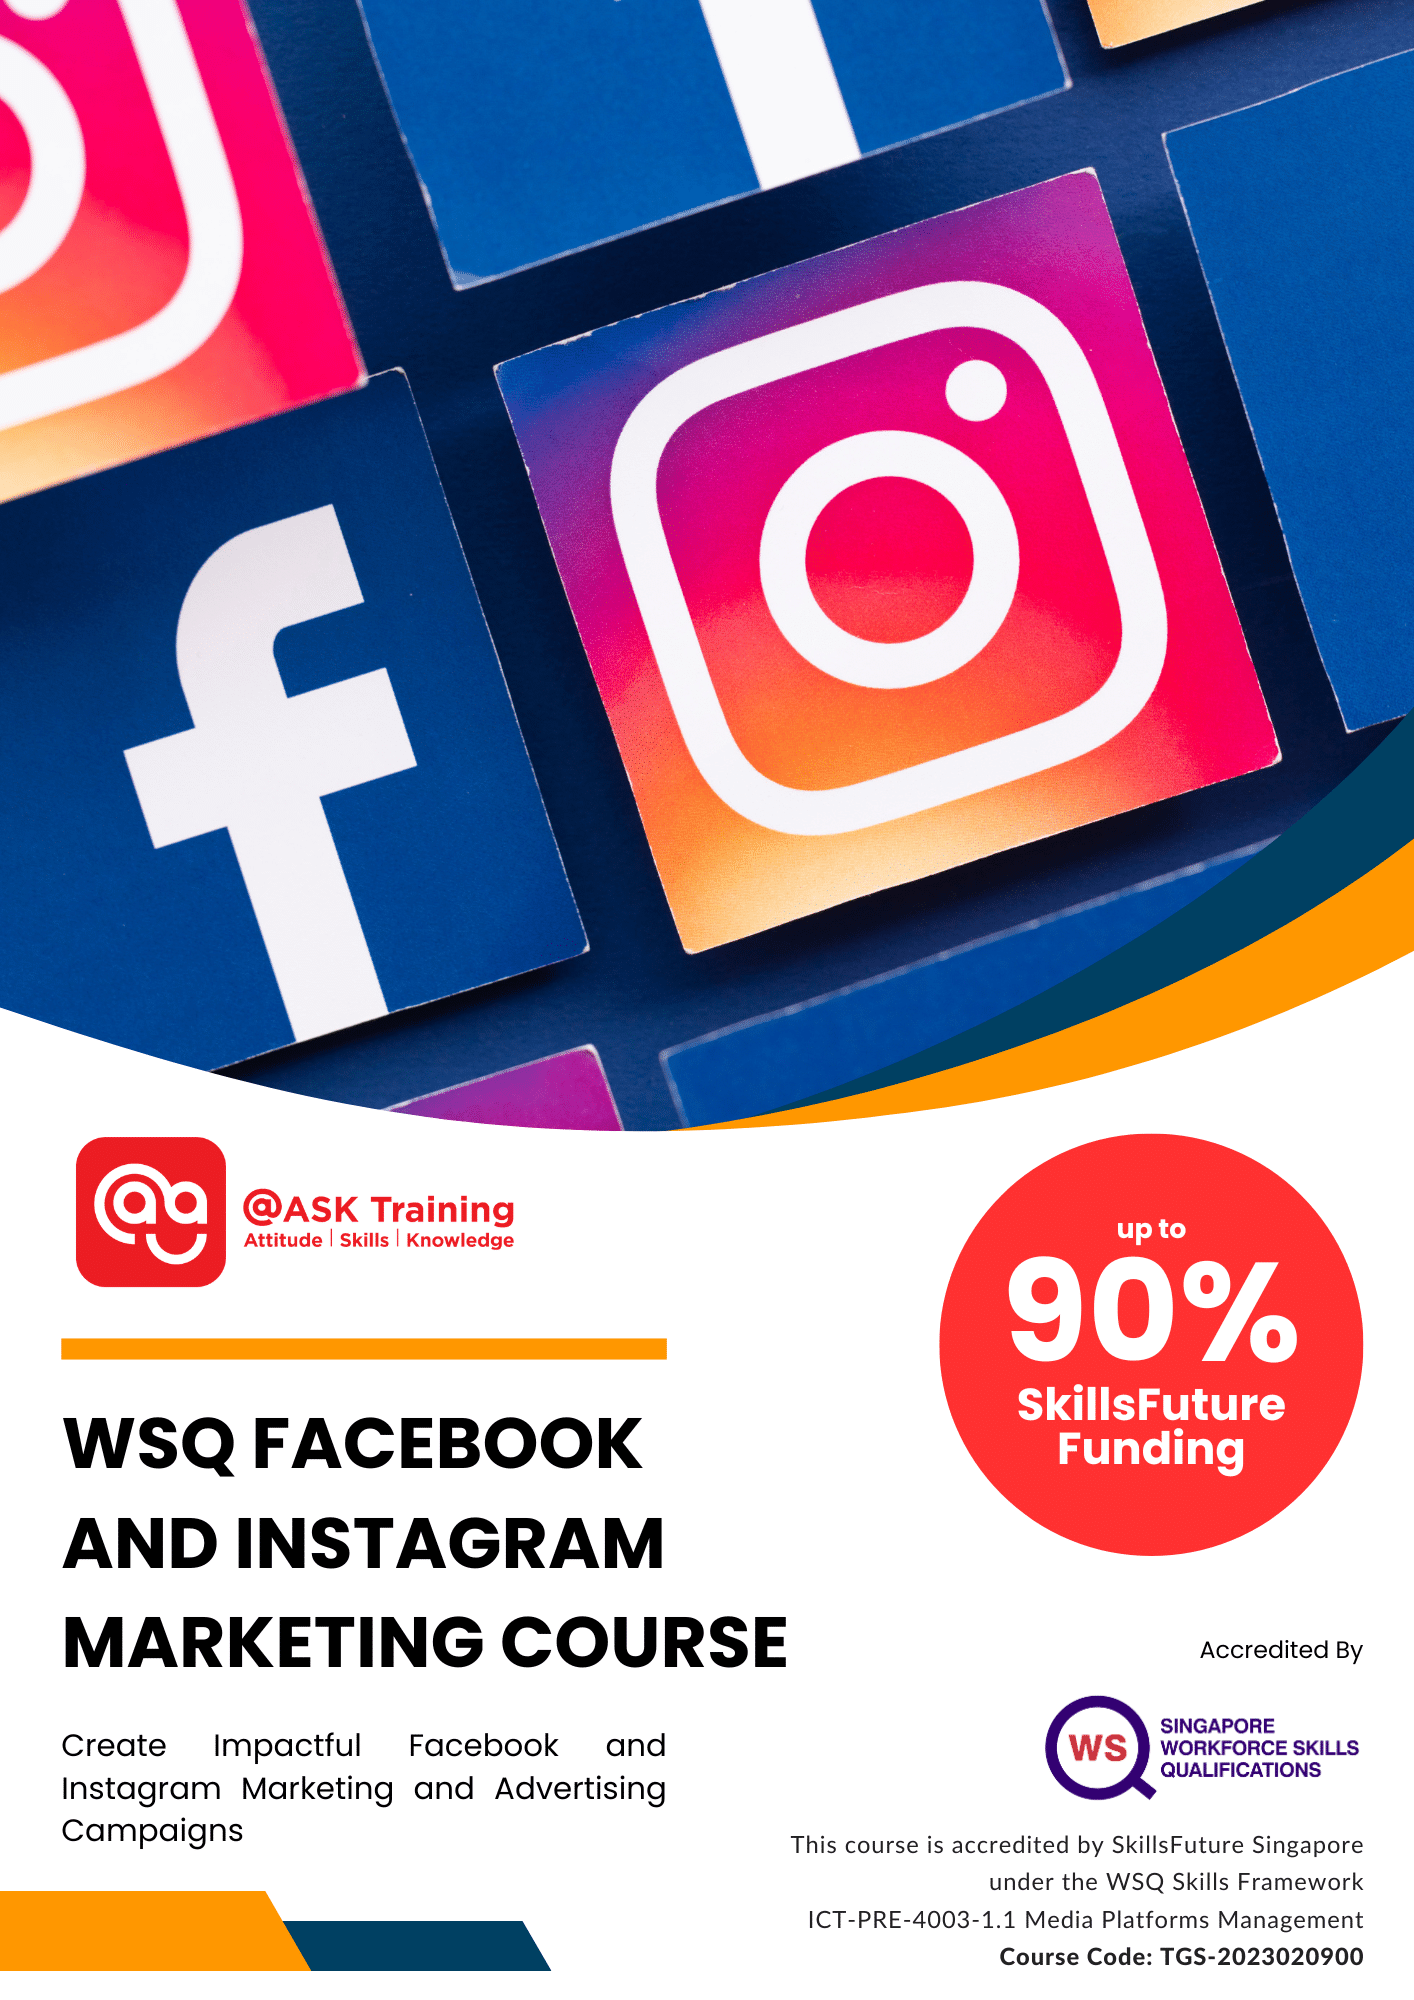 WSQ Facebook and Instagram Marketing Course Brochure Cover